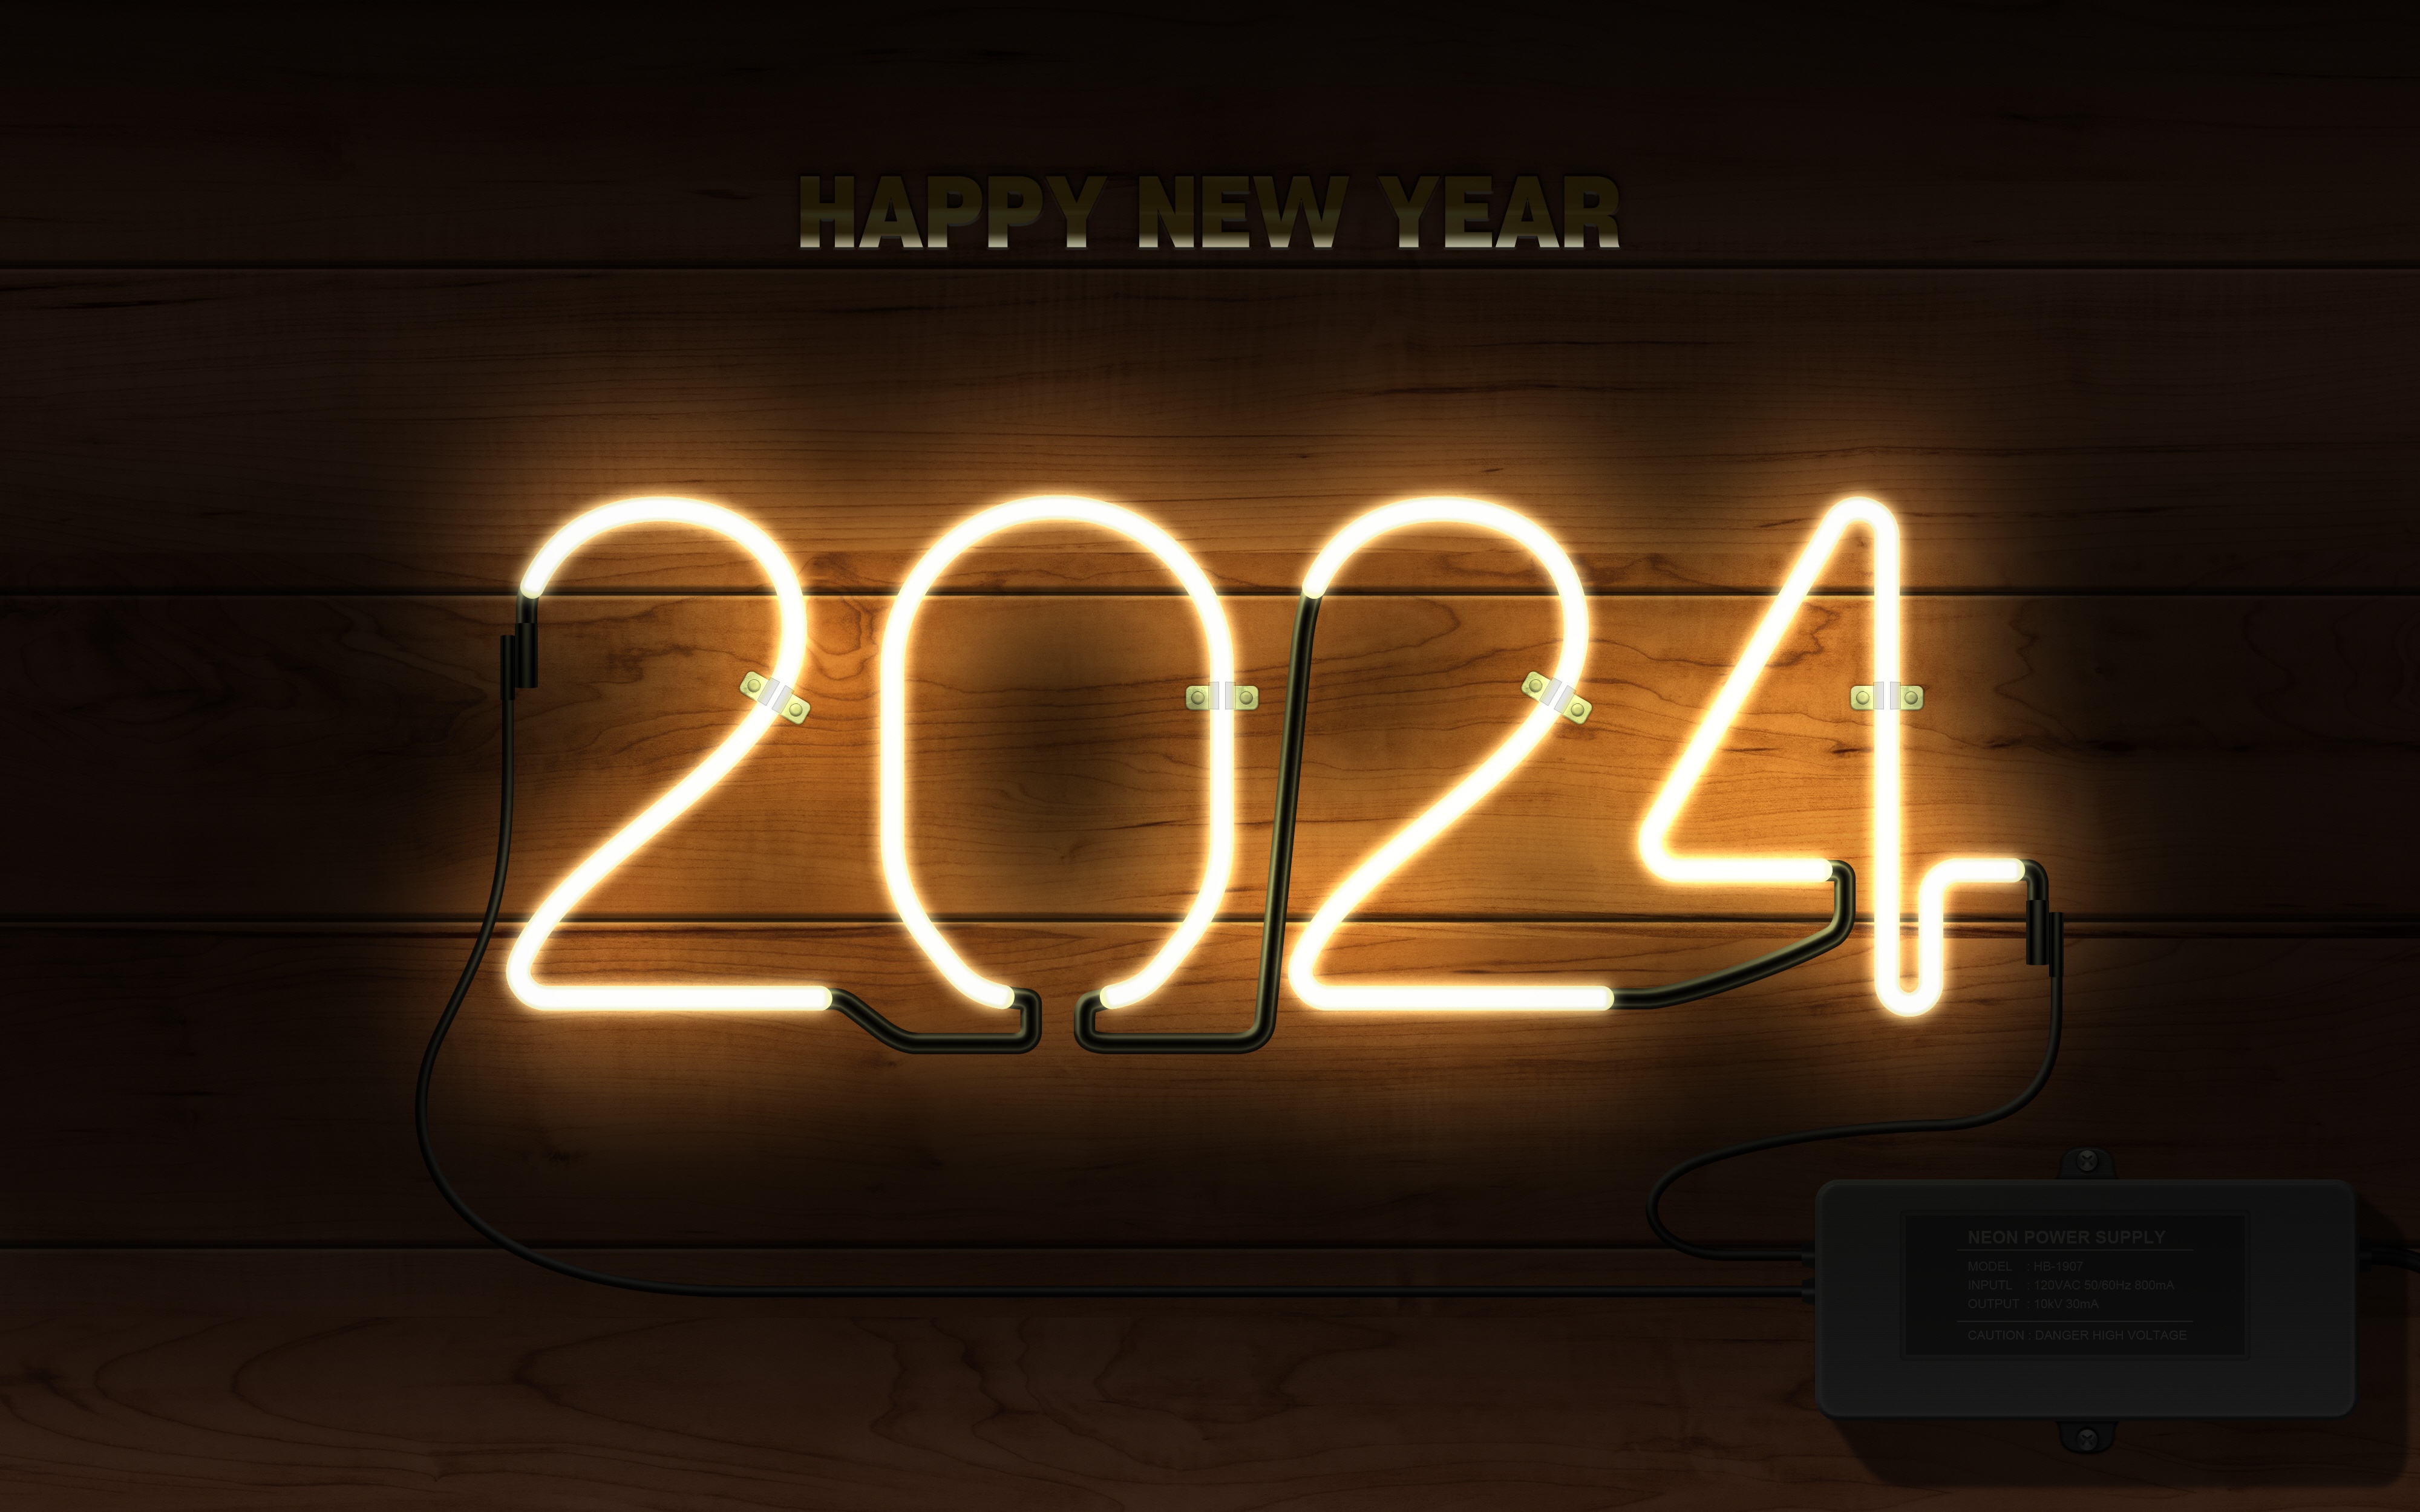 Download wallpaper new year, neon, happy new year, neon sign, 2024year, 2024 year, section new year / christmas in resolution 4000x2500